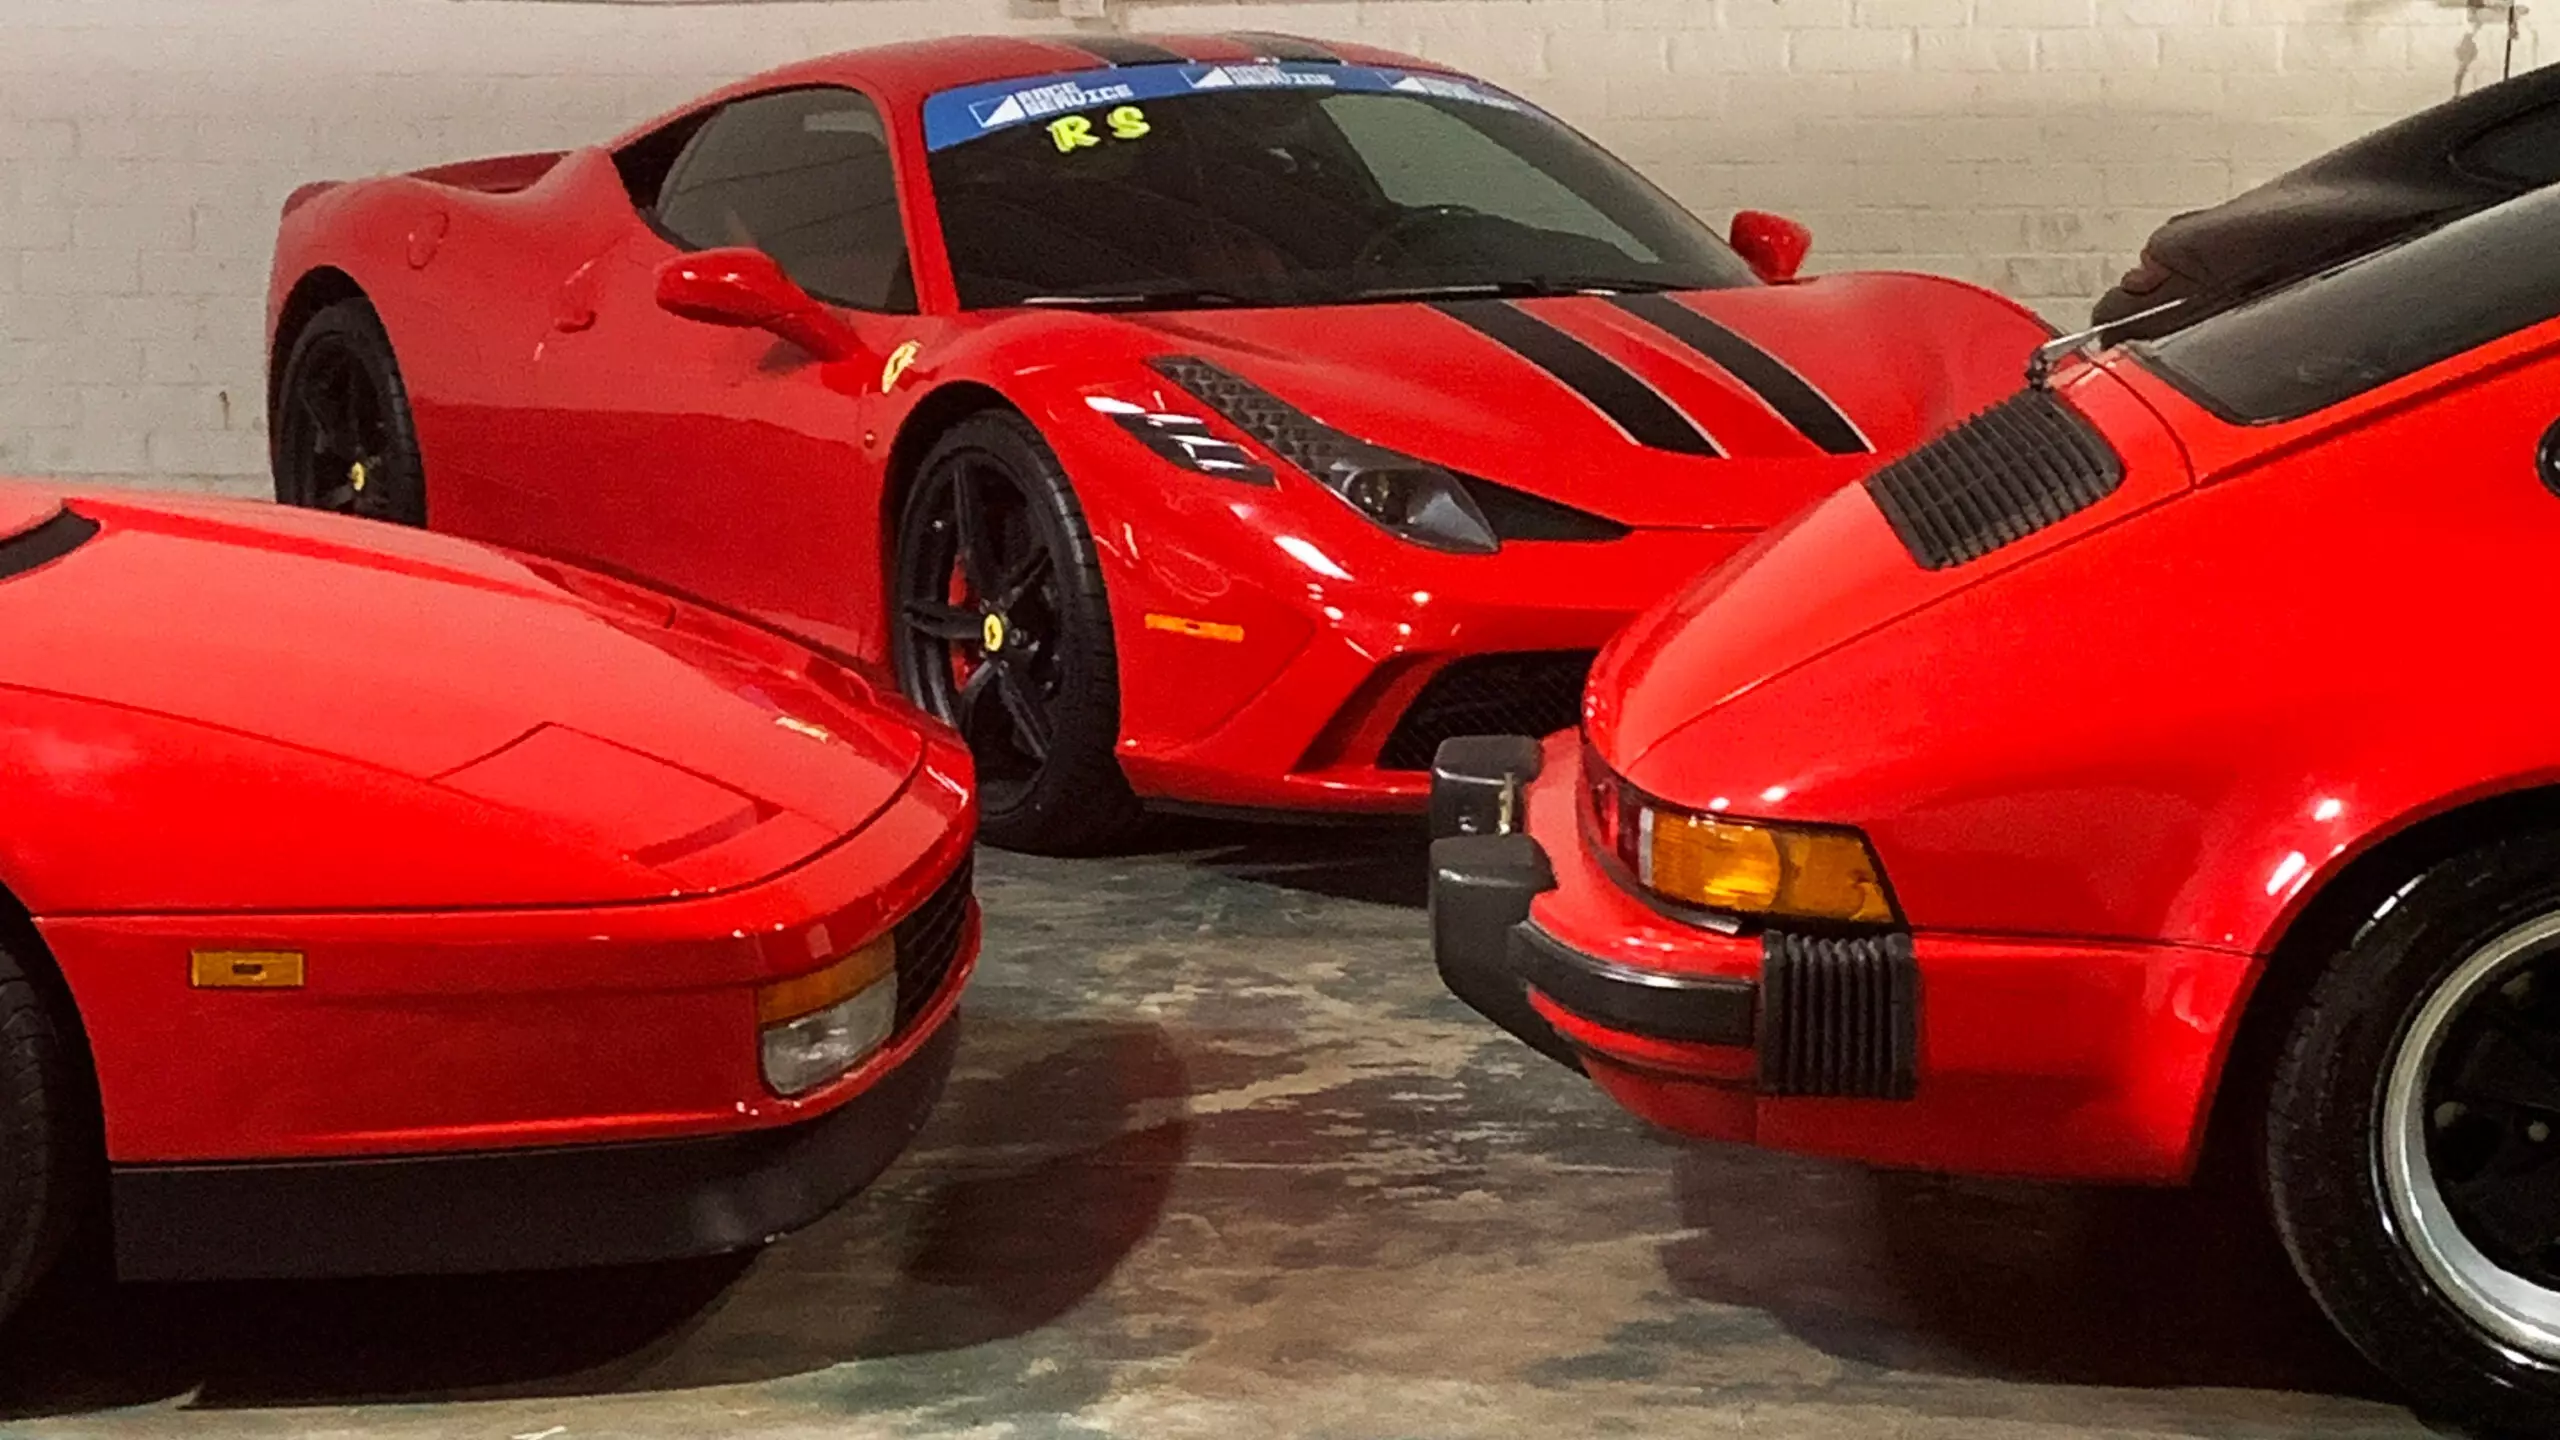 Red Hot Sports Cars Just Look Right | Autance